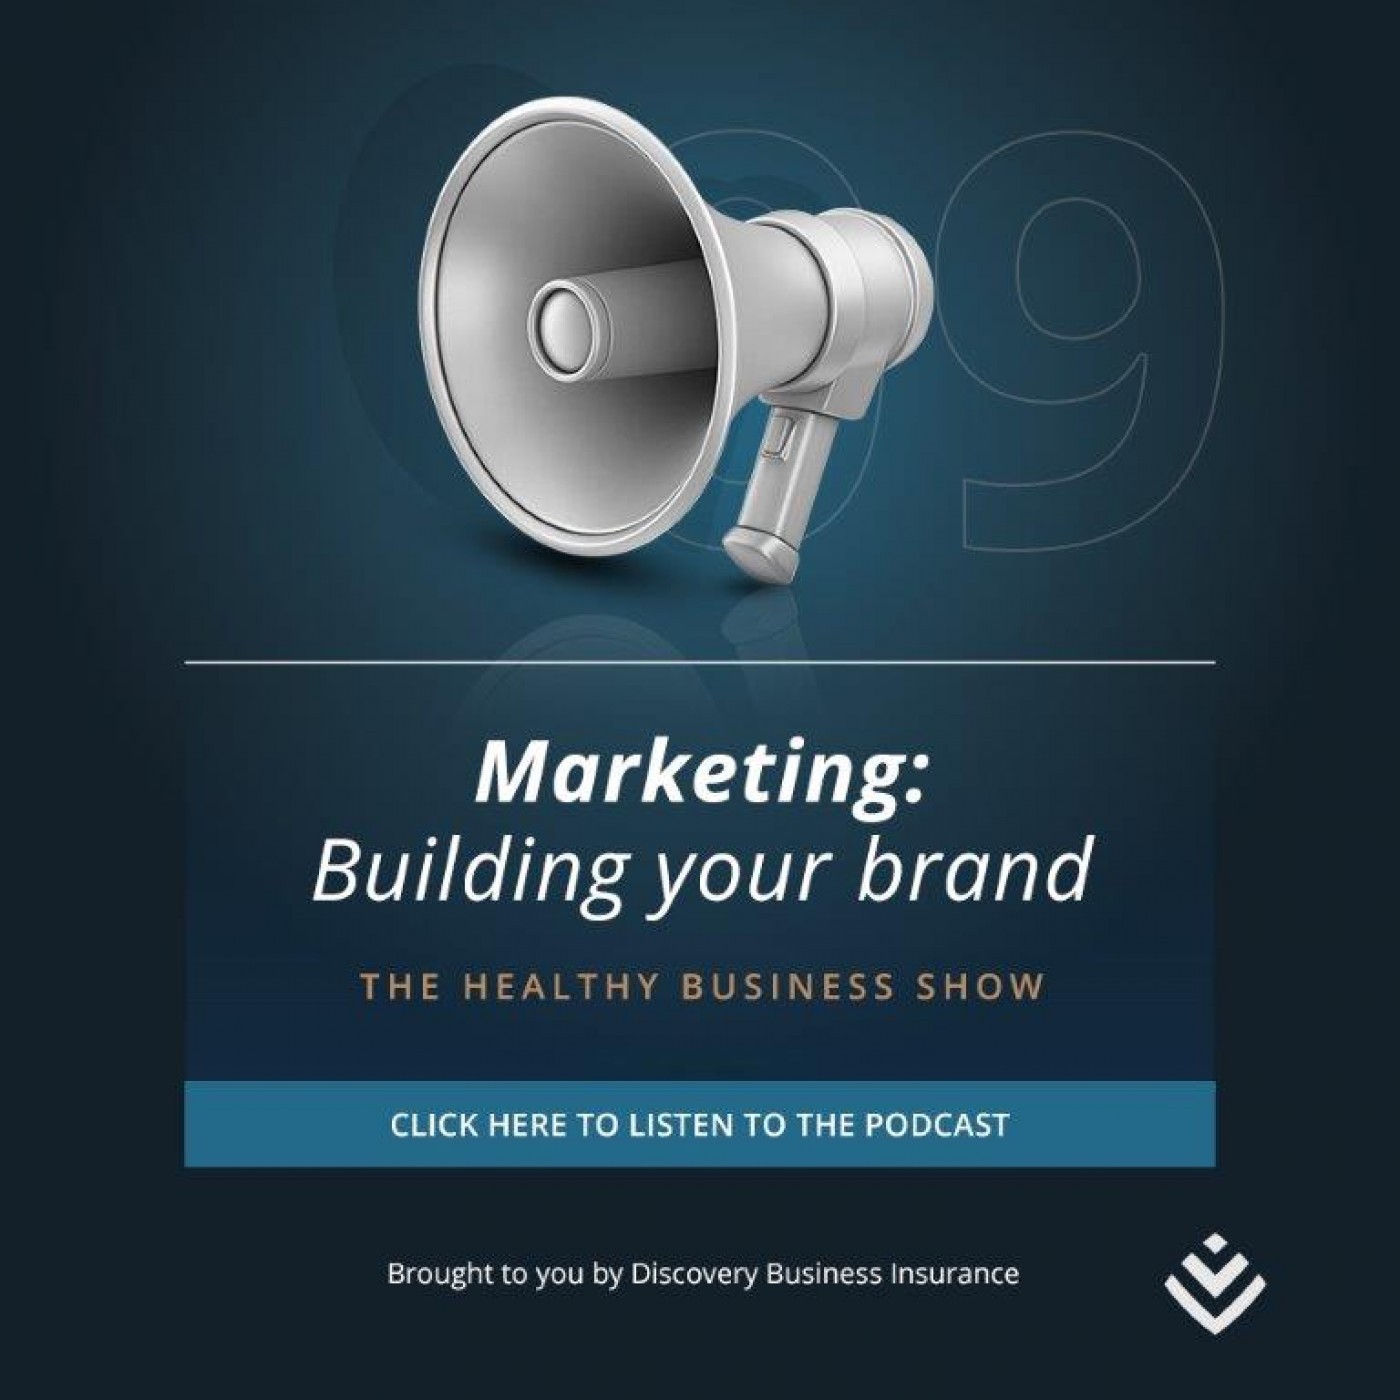 The Healthy Business Show: Marketing: Building your brand